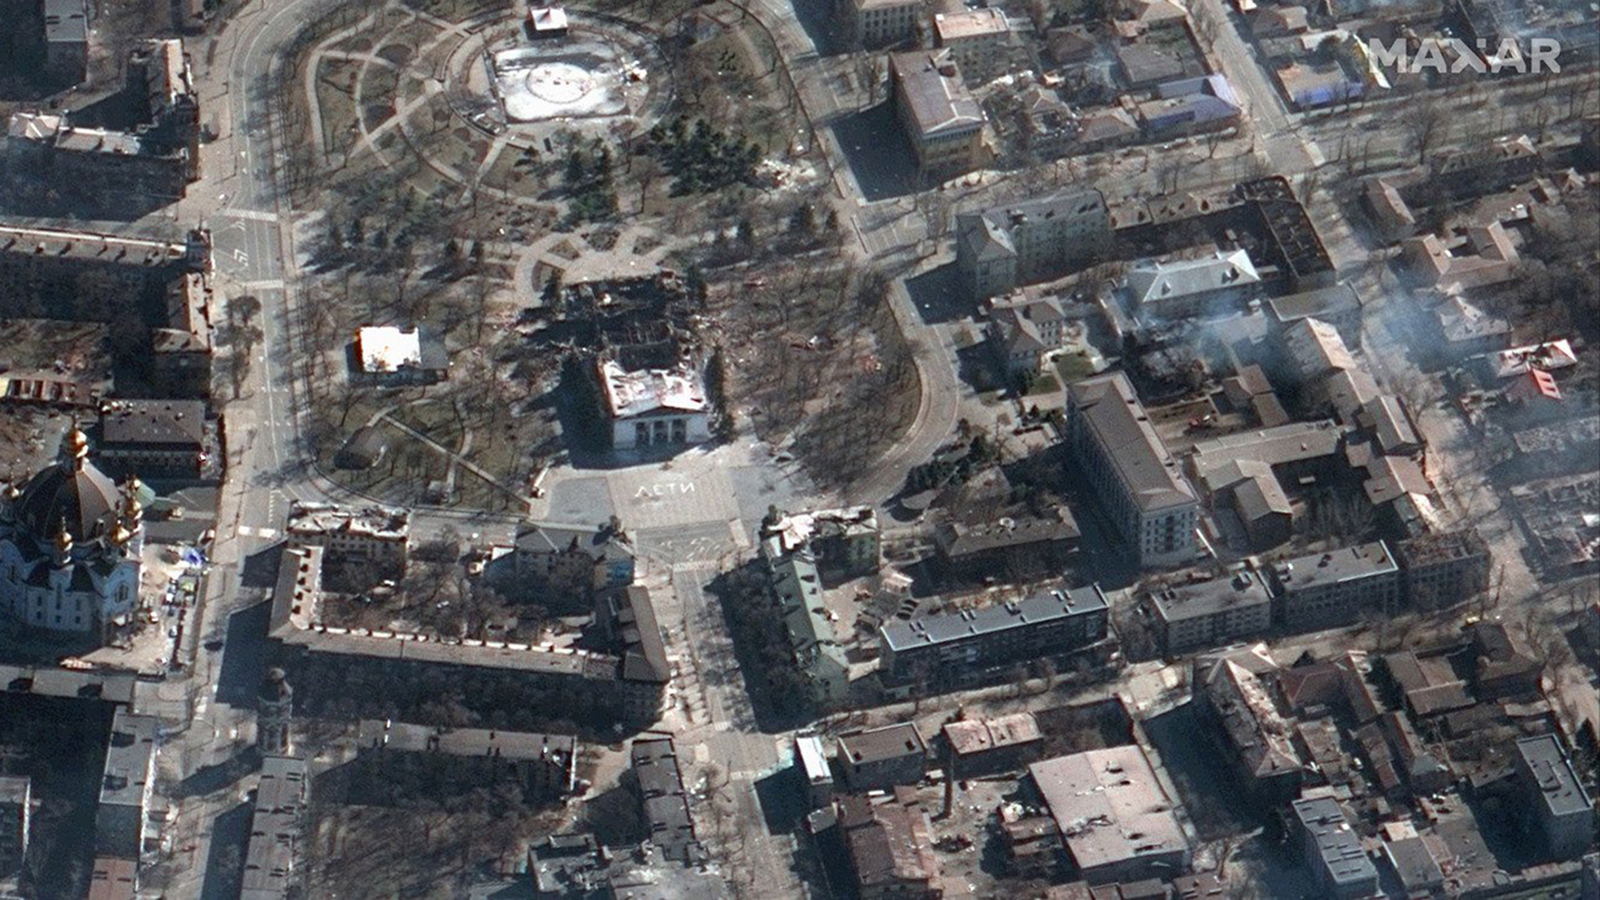 Mariupol theater seen in the aftermath of the Russian strike in this satellite image from March 19.